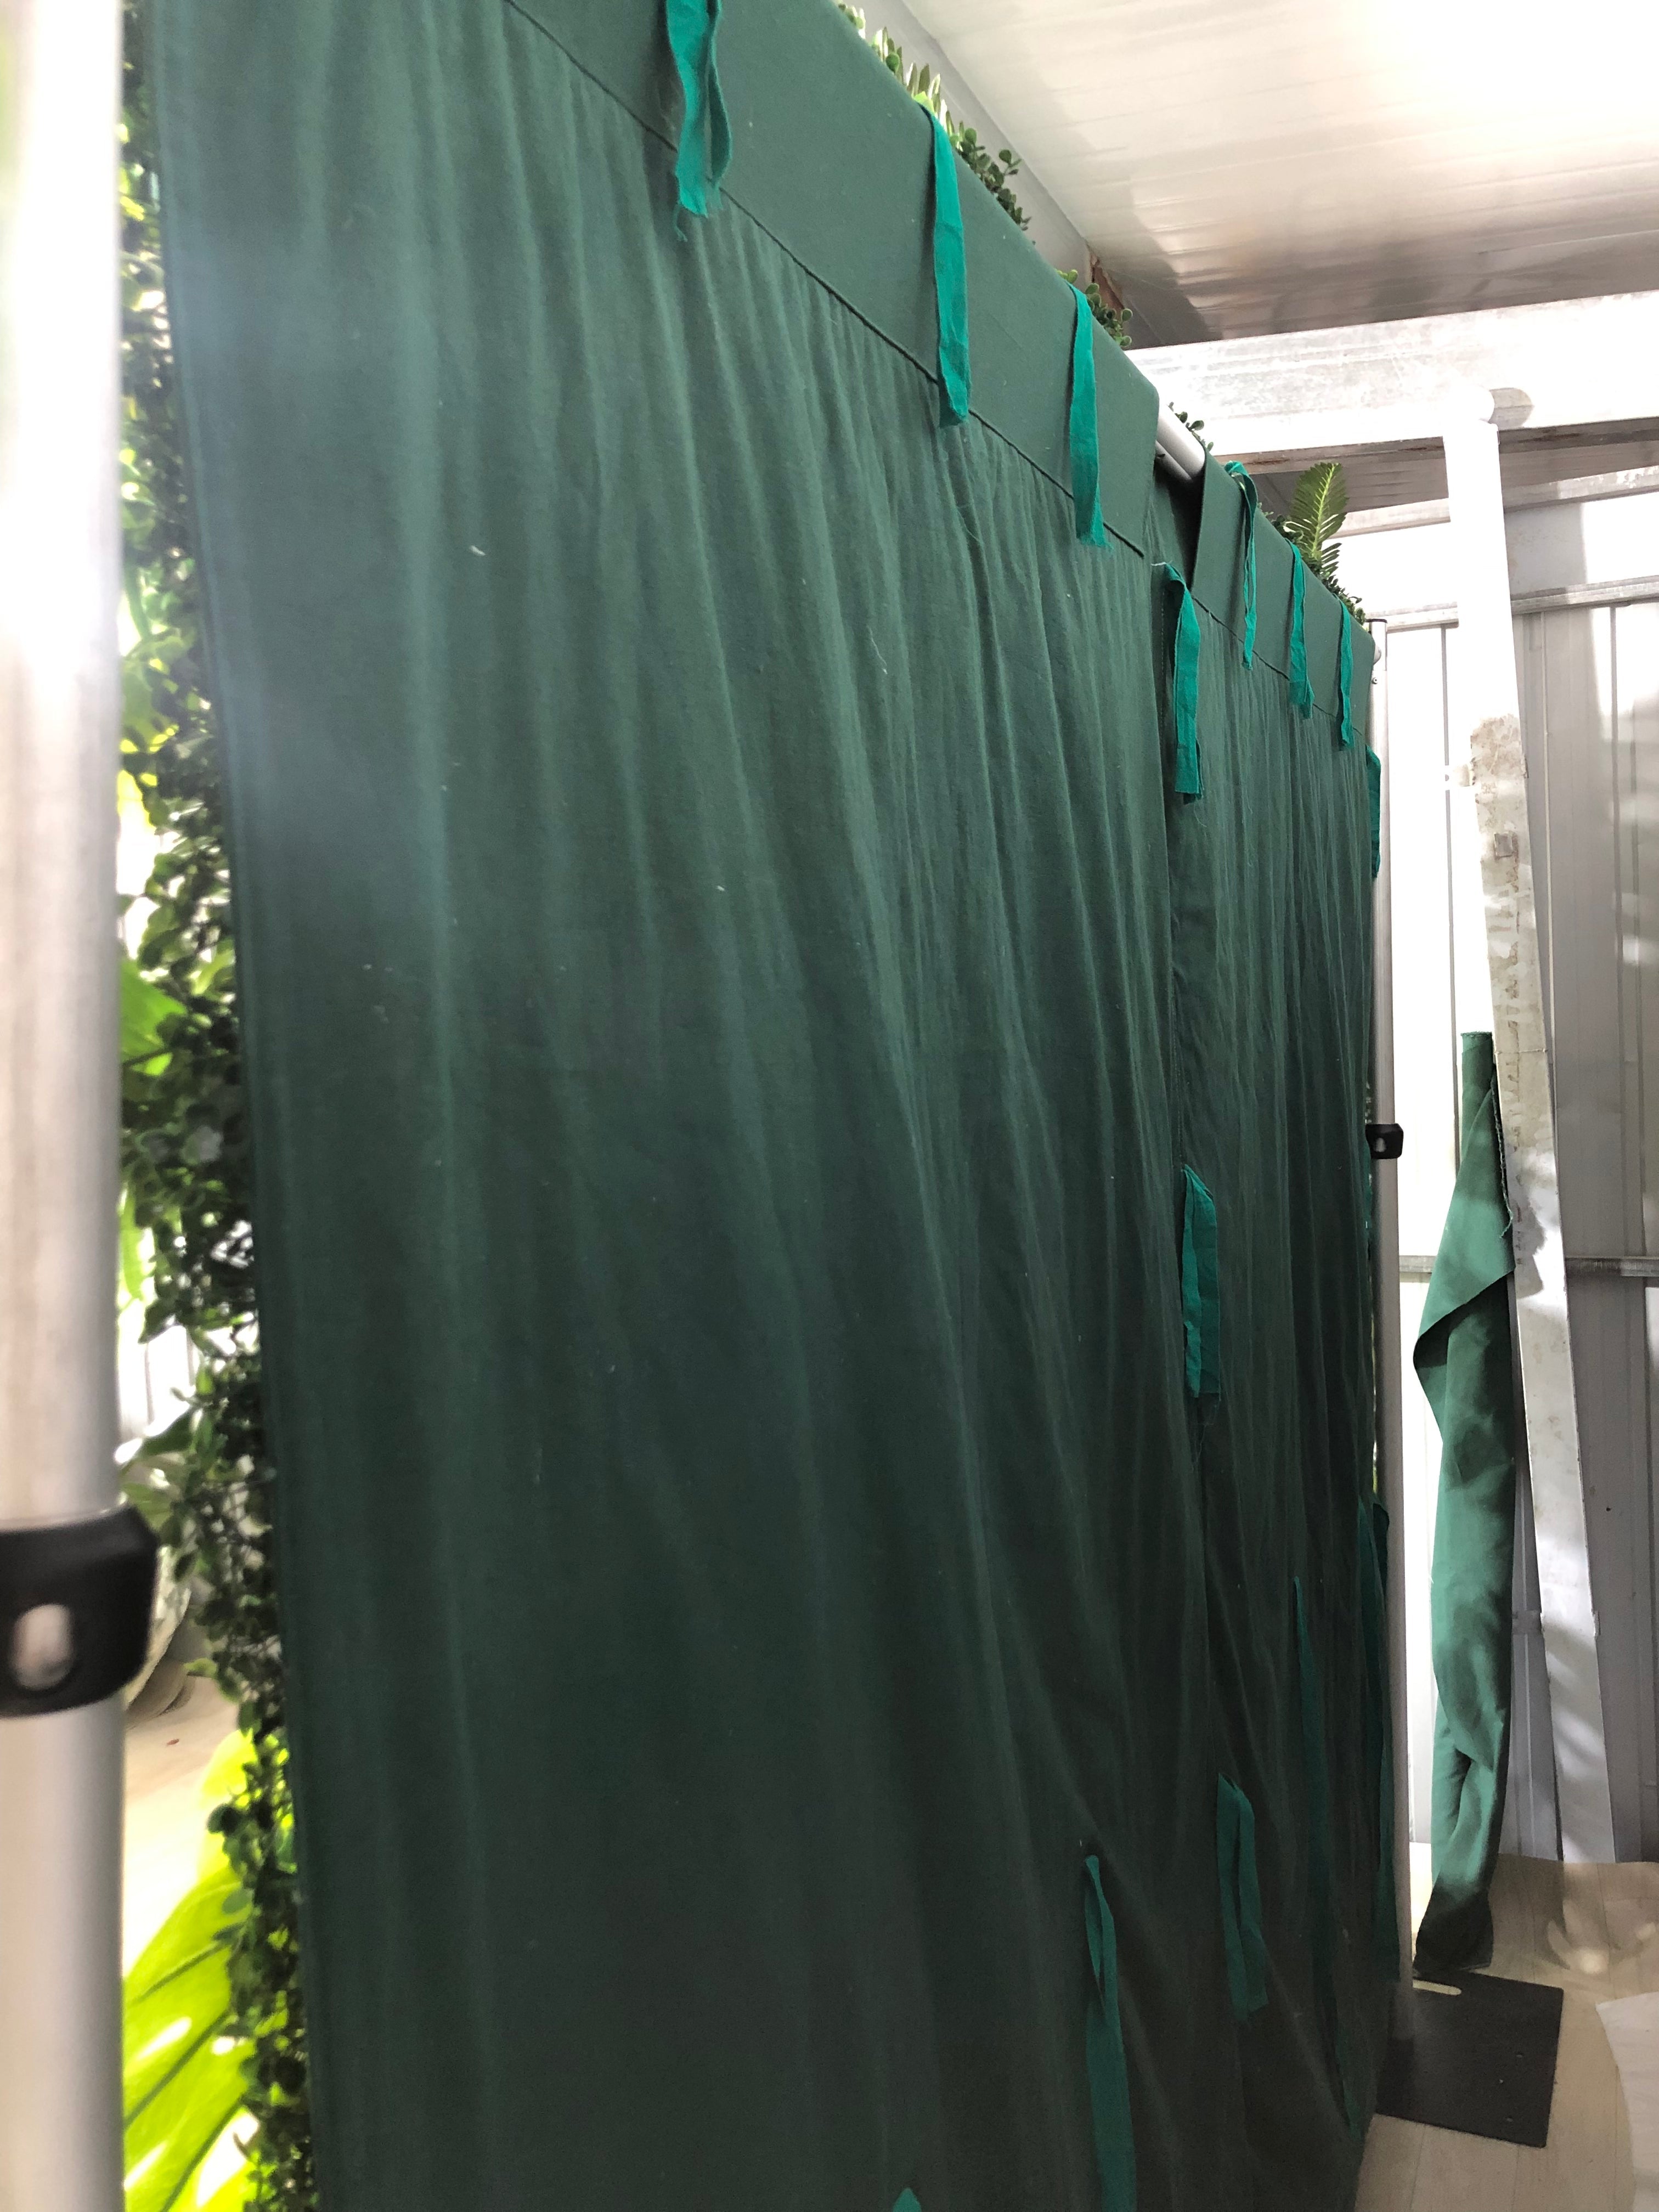 The green tropical leaves flower wall is fixed to a green cloth.